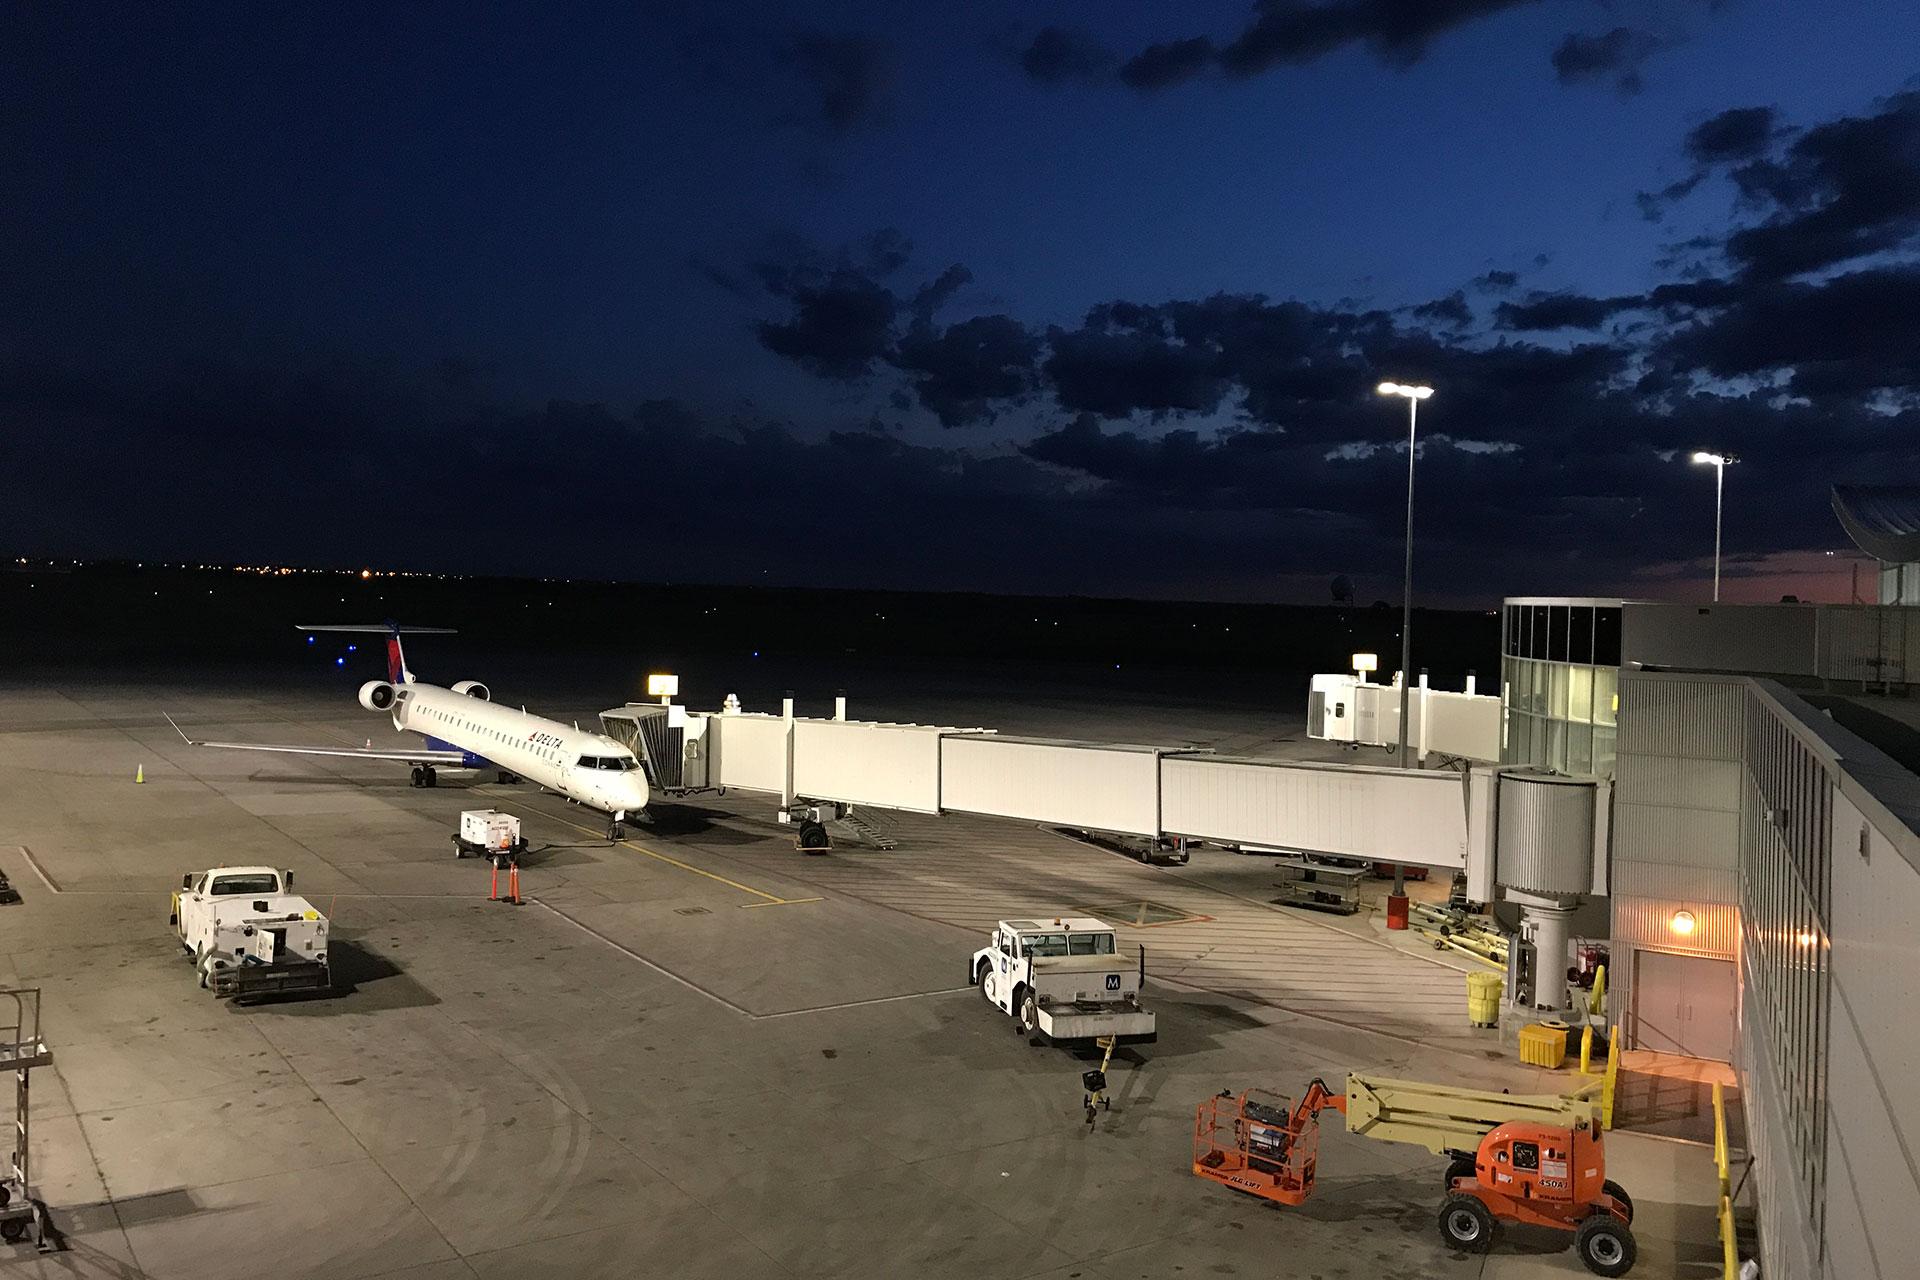 OMNIstar improves the quality of light to enhance safety for all while reducing the operating costs for Saskatoon airport